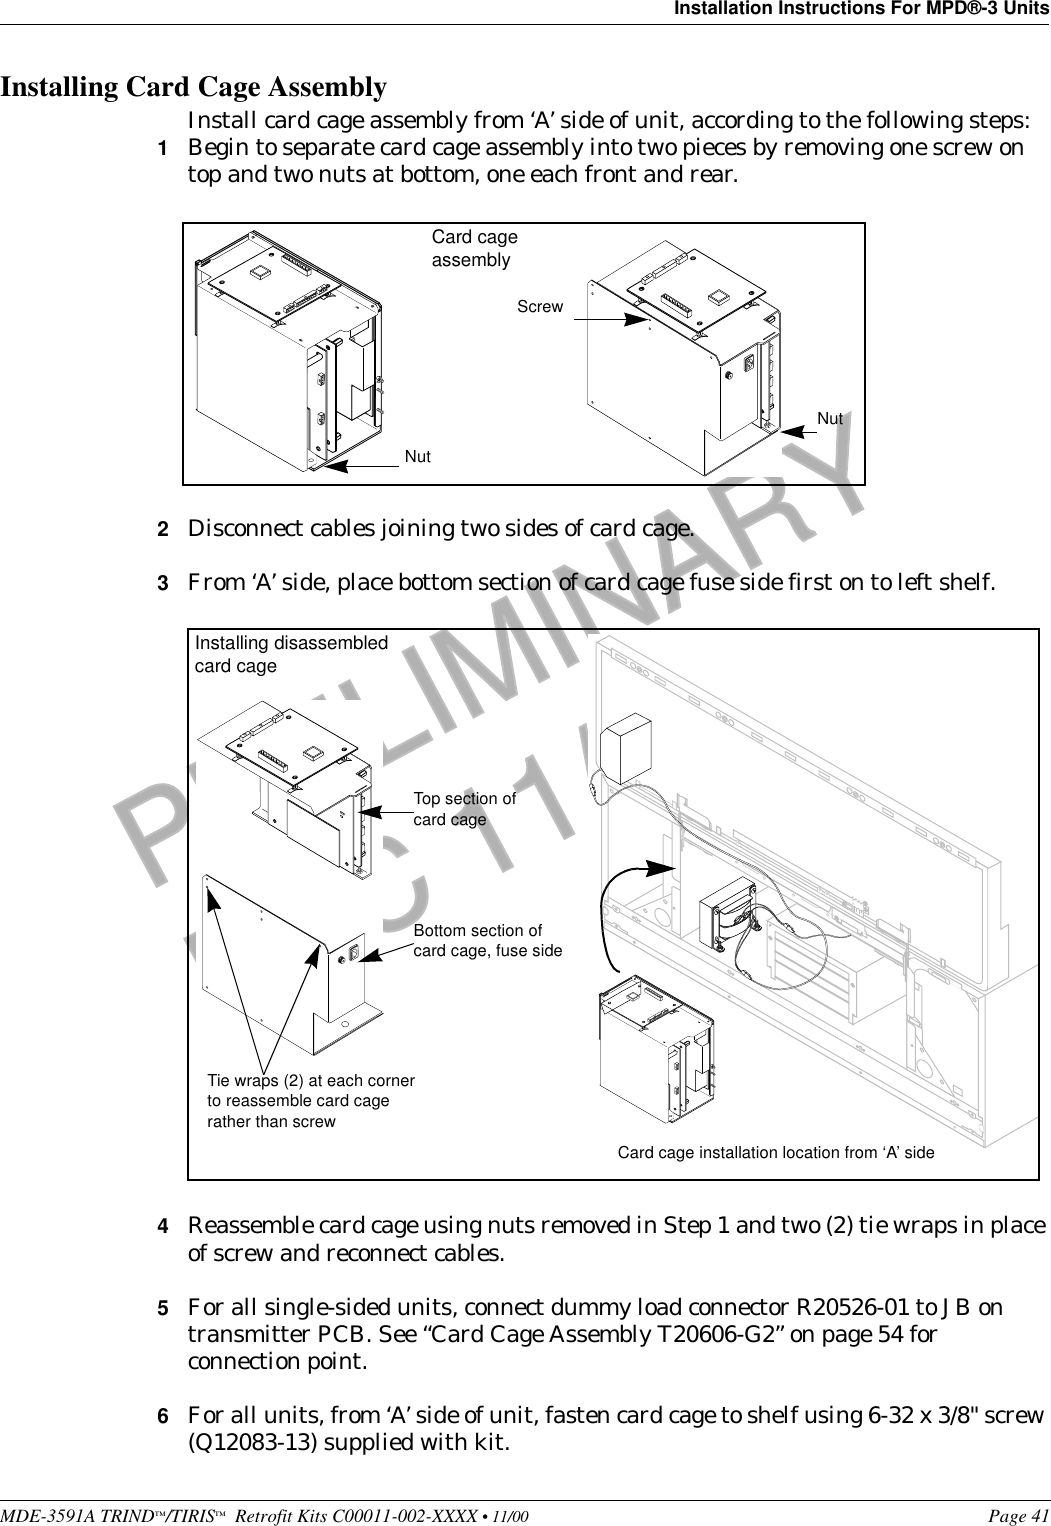 MDE-3591A TRIND™/TIRIS™  Retrofit Kits C00011-002-XXXX • 11/00 Page 41Installation Instructions For MPD®-3 UnitsPRELIMINARYFCC 11/30Installing Card Cage AssemblyInstall card cage assembly from ‘A’ side of unit, according to the following steps:1Begin to separate card cage assembly into two pieces by removing one screw on top and two nuts at bottom, one each front and rear.2Disconnect cables joining two sides of card cage.3From ‘A’ side, place bottom section of card cage fuse side first on to left shelf.4Reassemble card cage using nuts removed in Step 1 and two (2) tie wraps in place of screw and reconnect cables.5For all single-sided units, connect dummy load connector R20526-01 to JB on transmitter PCB. See “Card Cage Assembly T20606-G2” on page 54 for connection point.6For all units, from ‘A’ side of unit, fasten card cage to shelf using 6-32 x 3/8&quot; screw (Q12083-13) supplied with kit.Screw NutNutCard cage assembly++++Installing disassembled card cageCard cage installation location from ‘A’ sideBottom section of card cage, fuse sideTop section of card cage Tie wraps (2) at each corner to reassemble card cage rather than screw